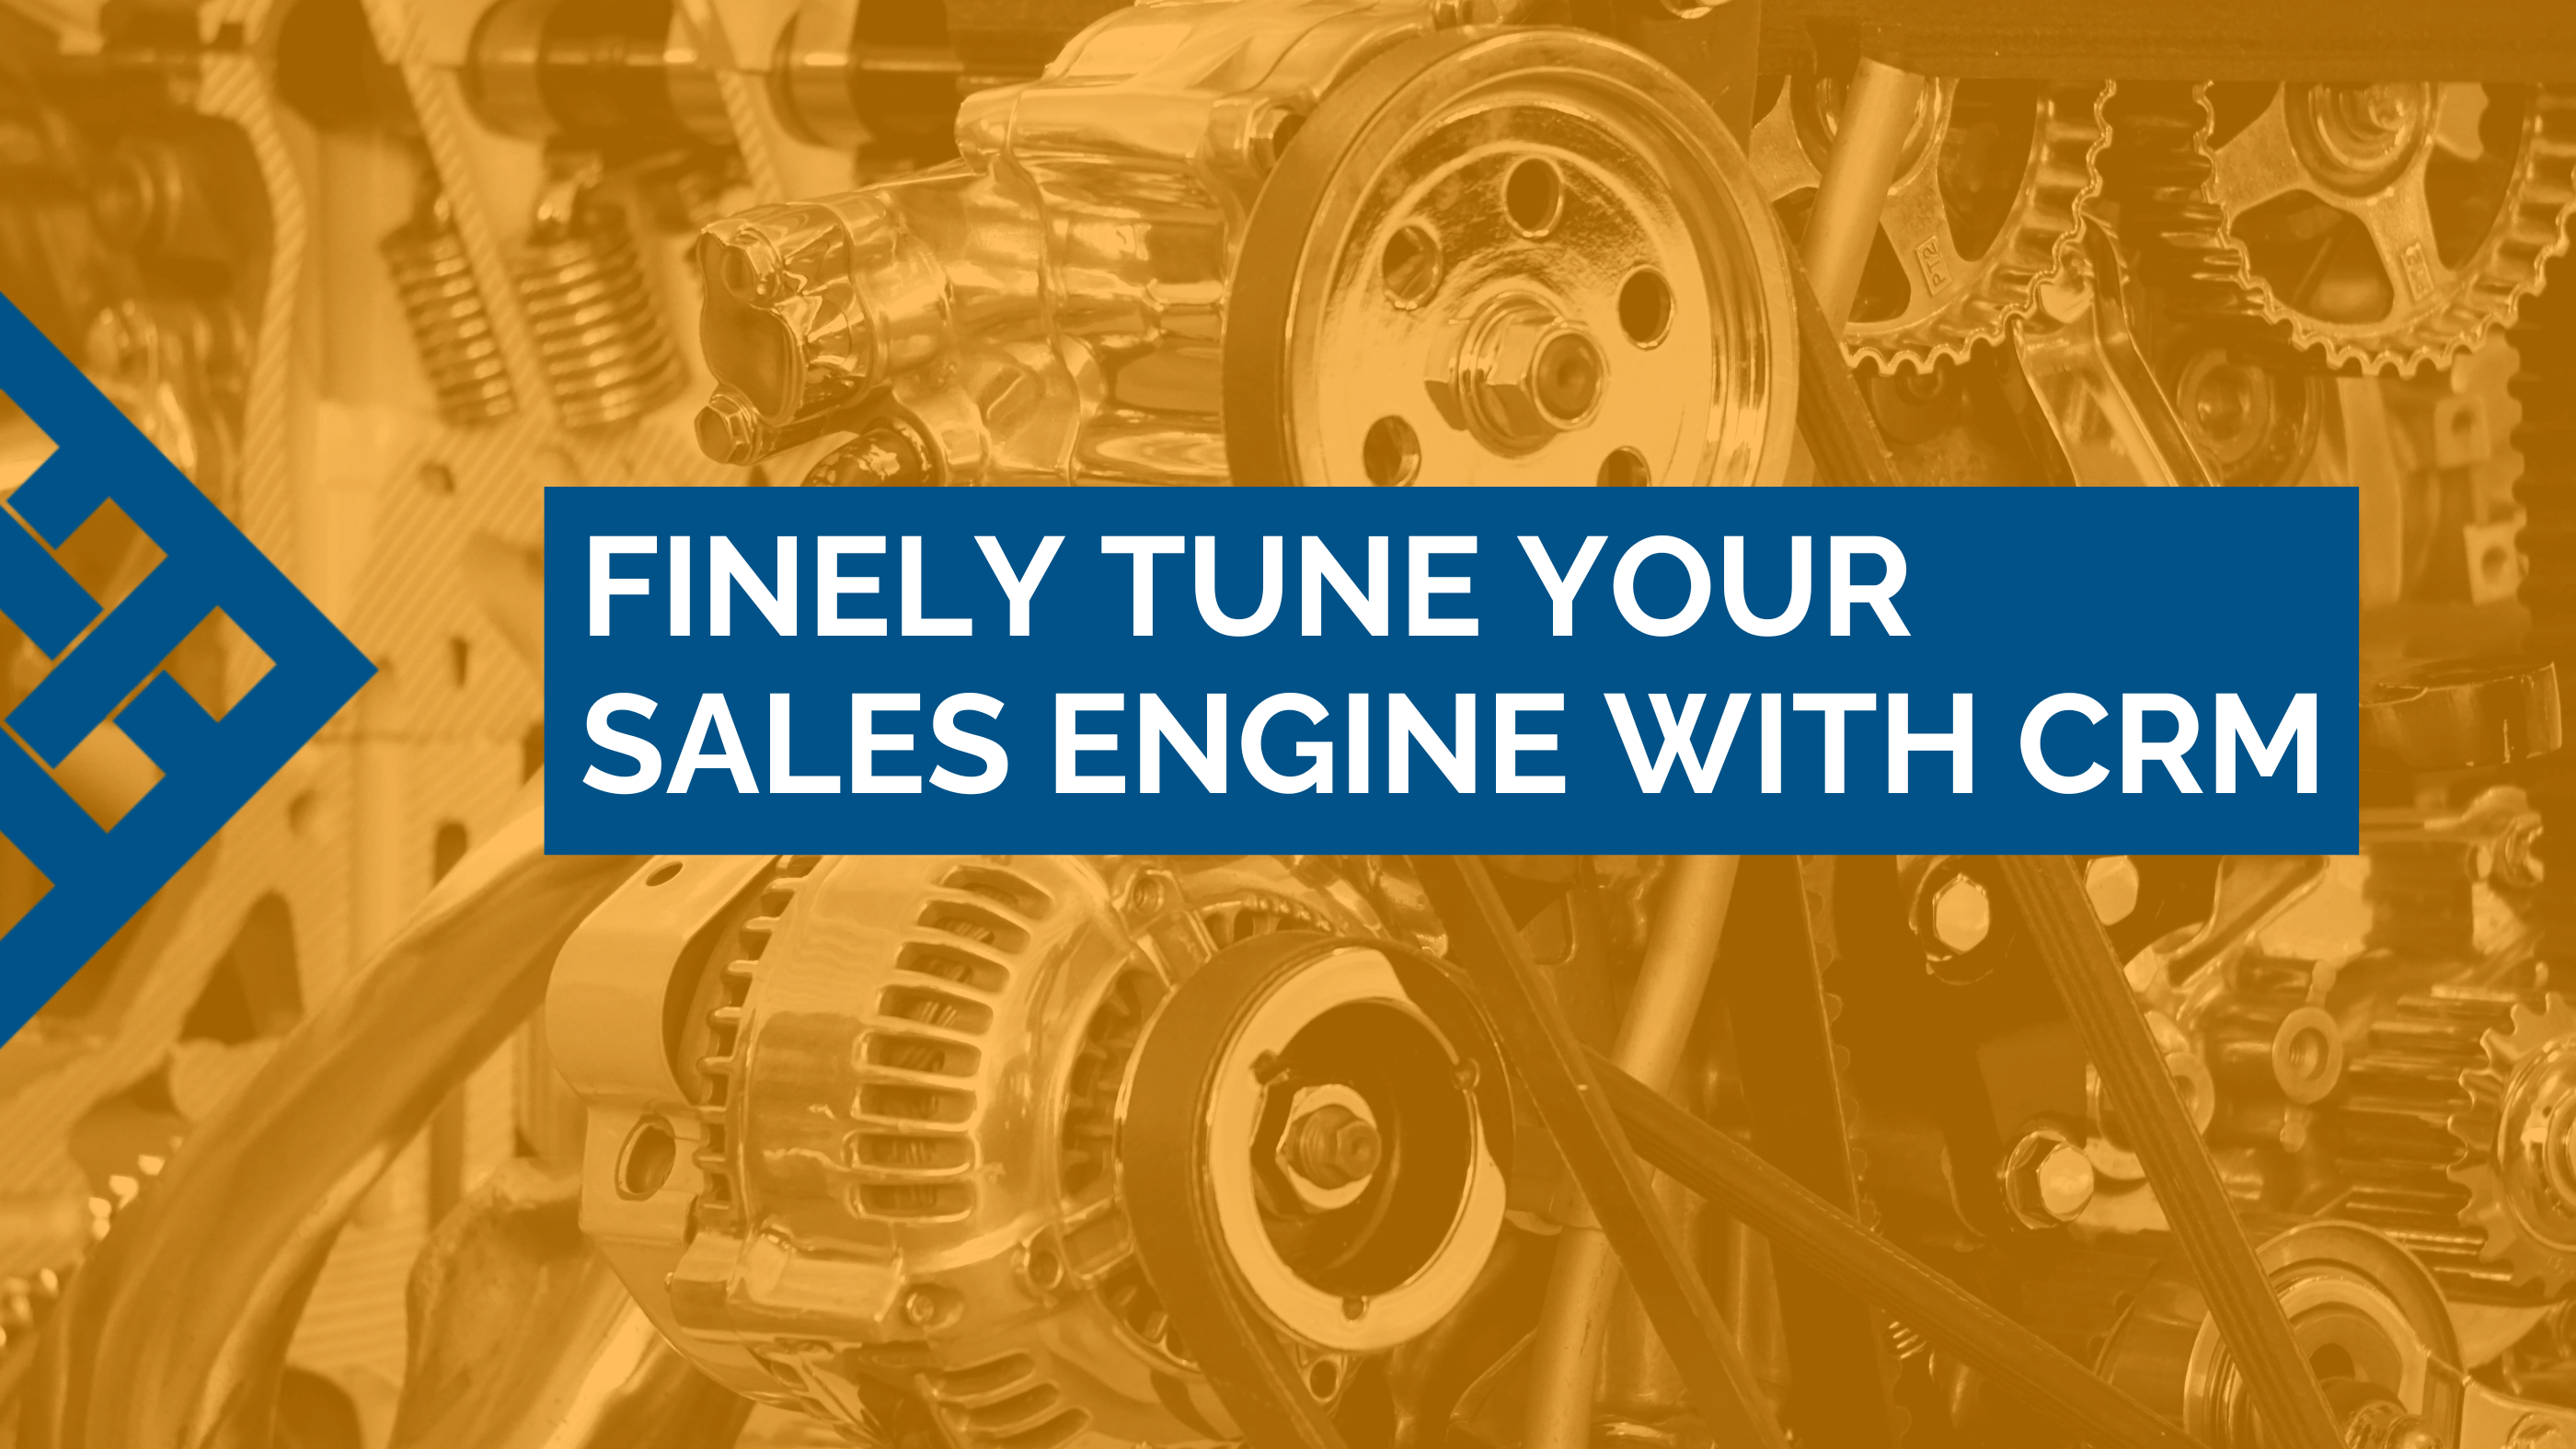 3 Ways to Finely Tune Your Sales Engine with CRM - blog graphic